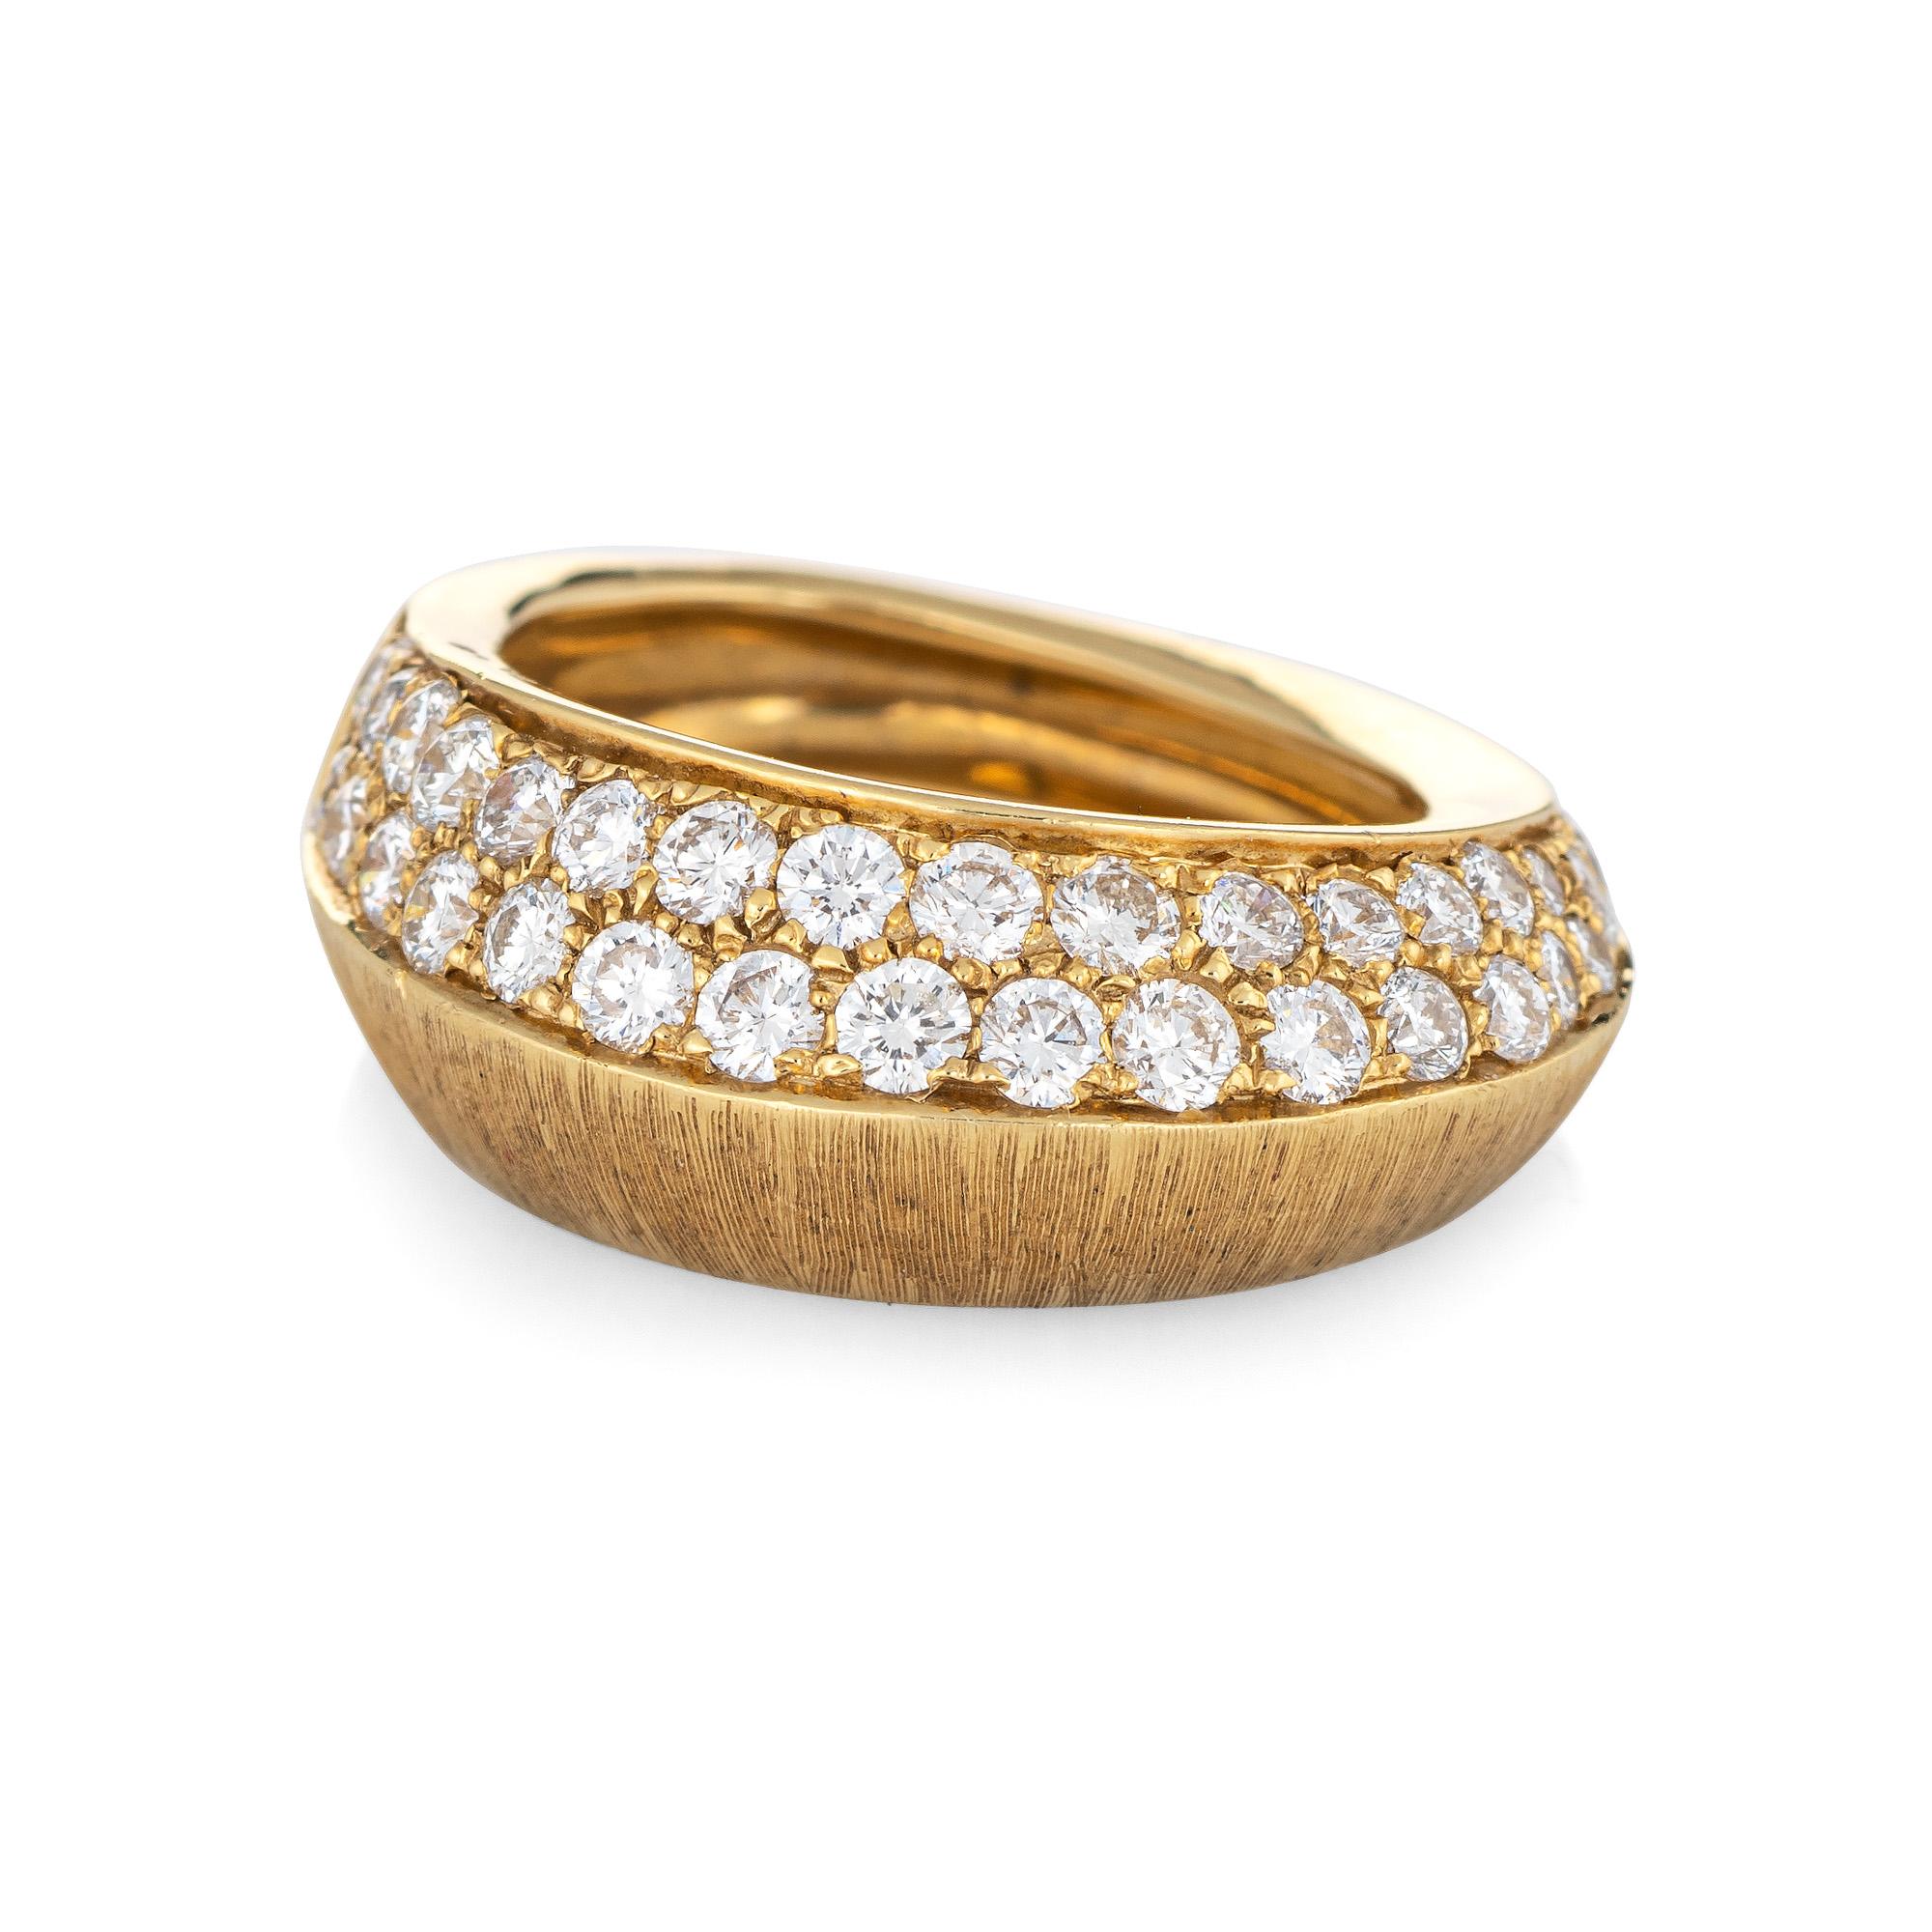 Stylish Io Si pointed diamond band crafted in 18 karat yellow gold. 

Round brilliant cut diamonds are pave set into the mount and total an estimated 1.24 carats (estimated at G-H color and VS2-SI1 clarity).  

The ring is pave set with diamonds in